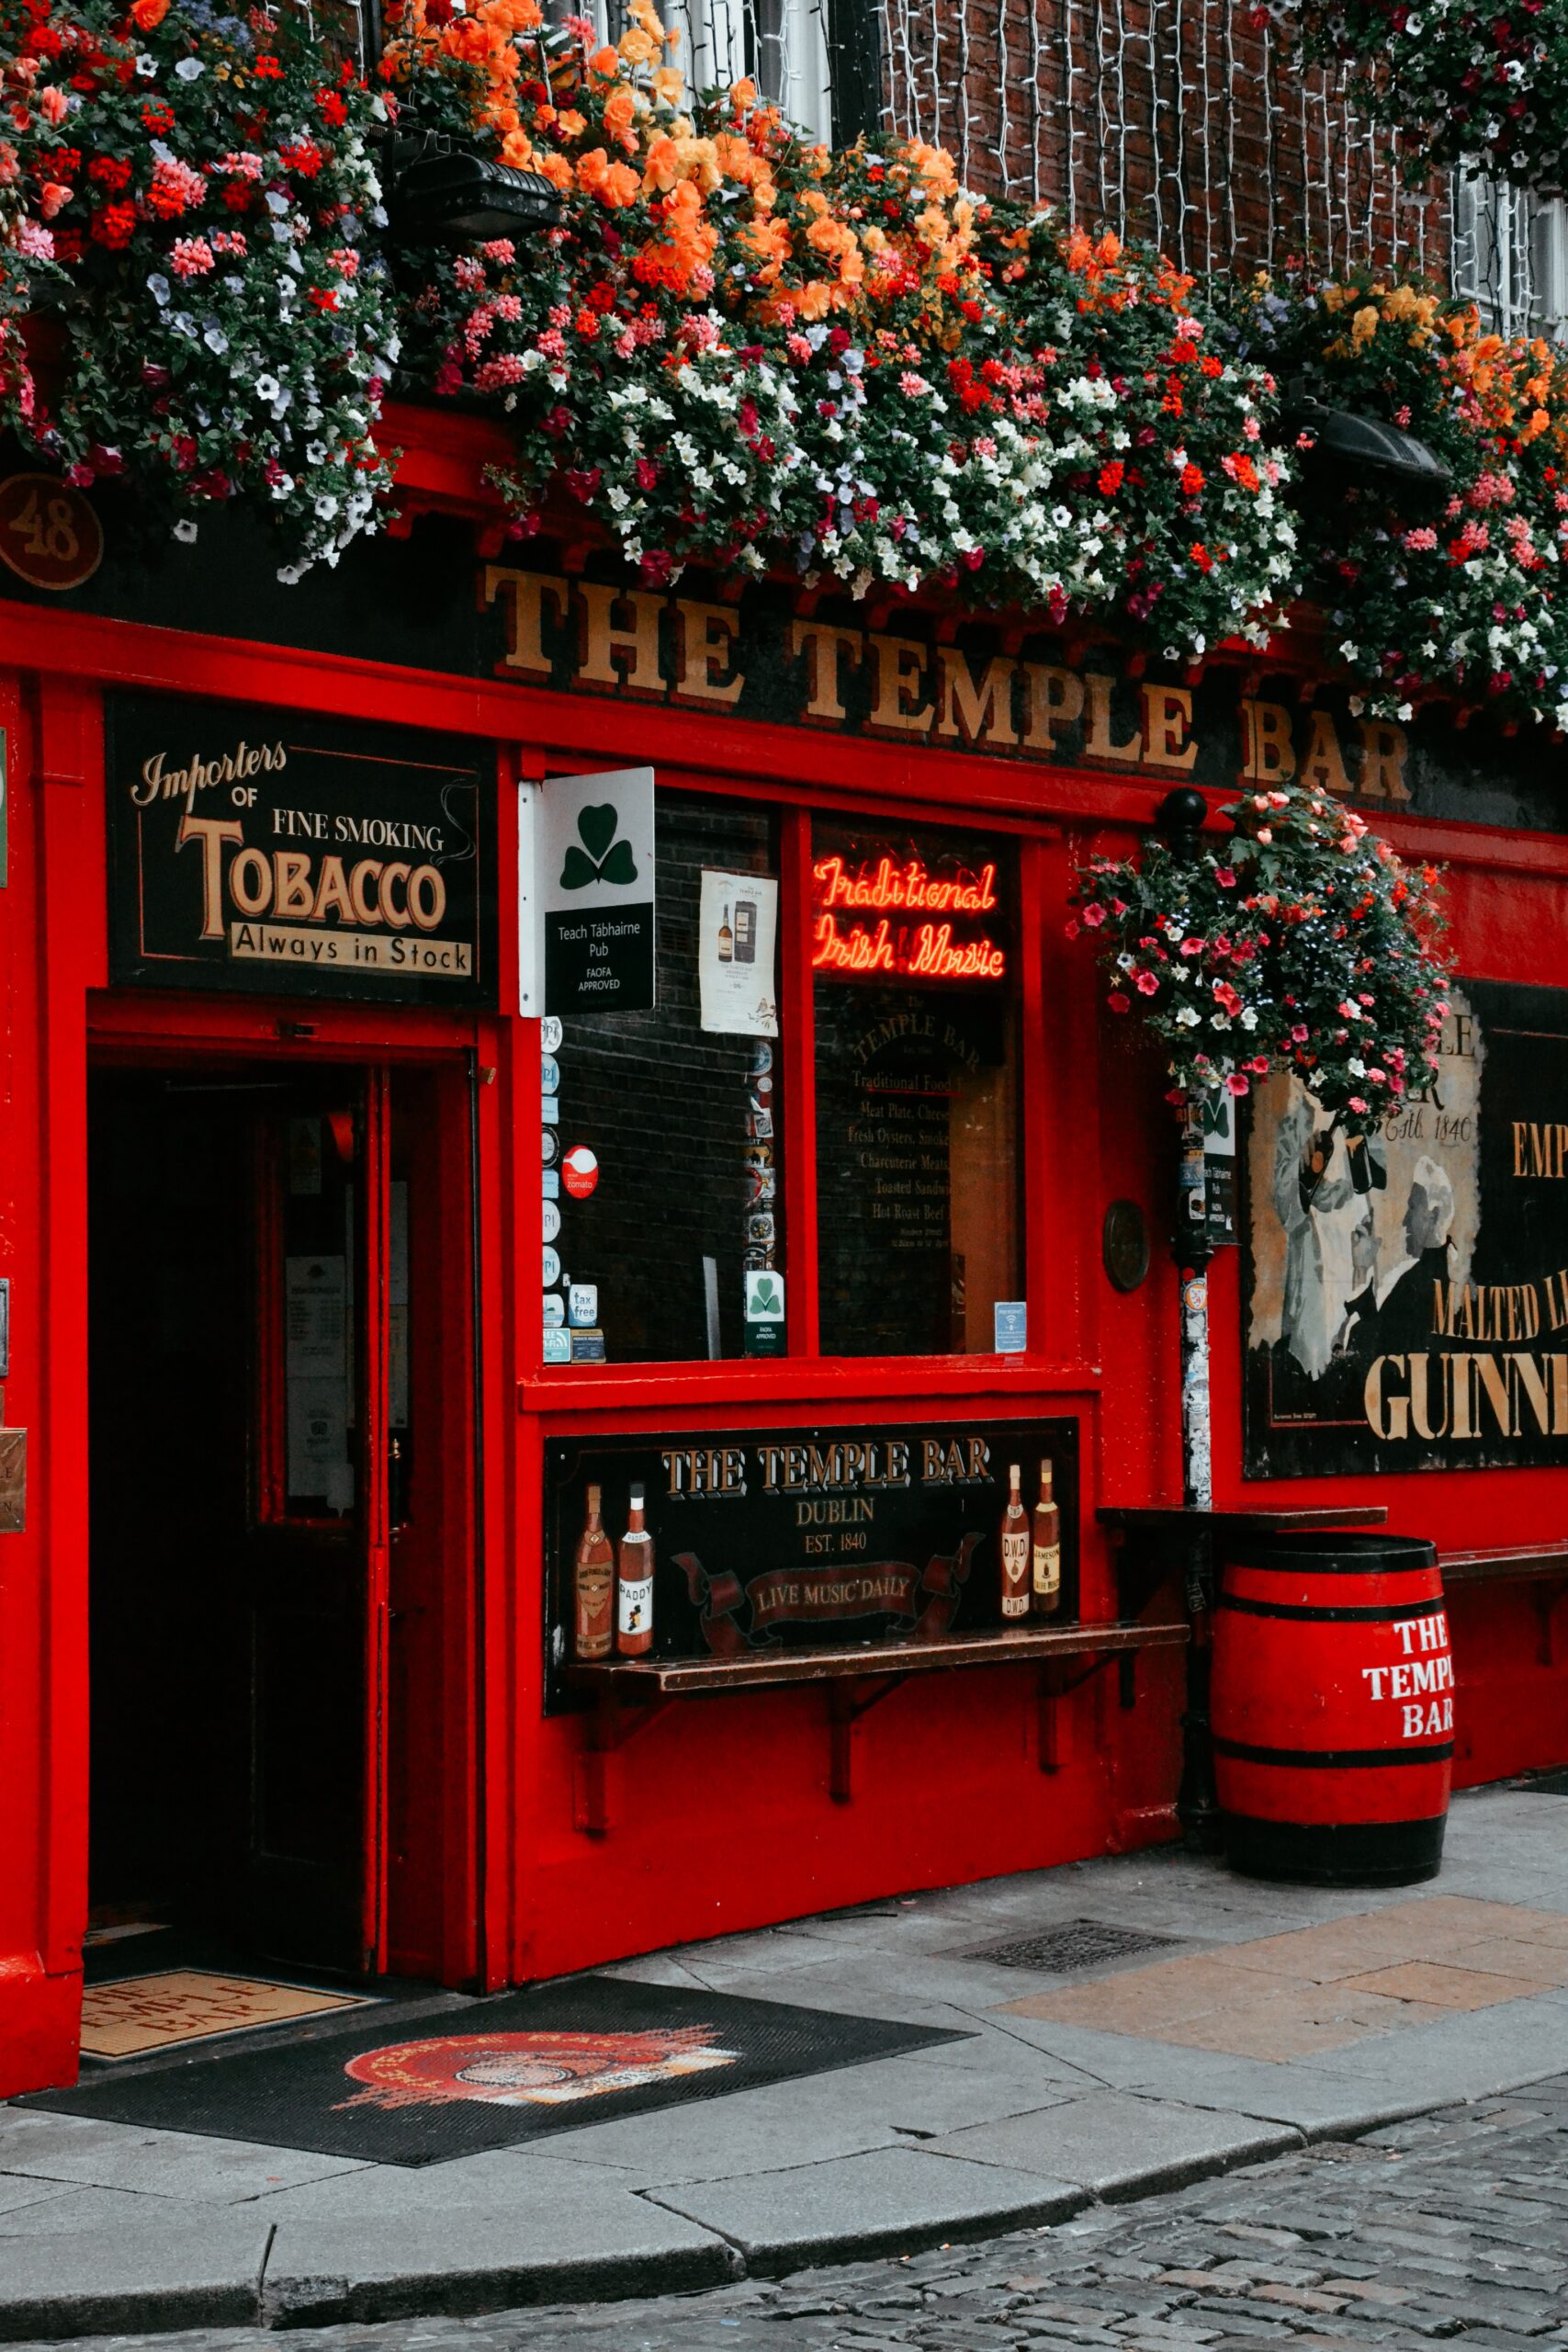 The Temple Bar in Dublin is a must visit. See more in our Ireland Travel Guide